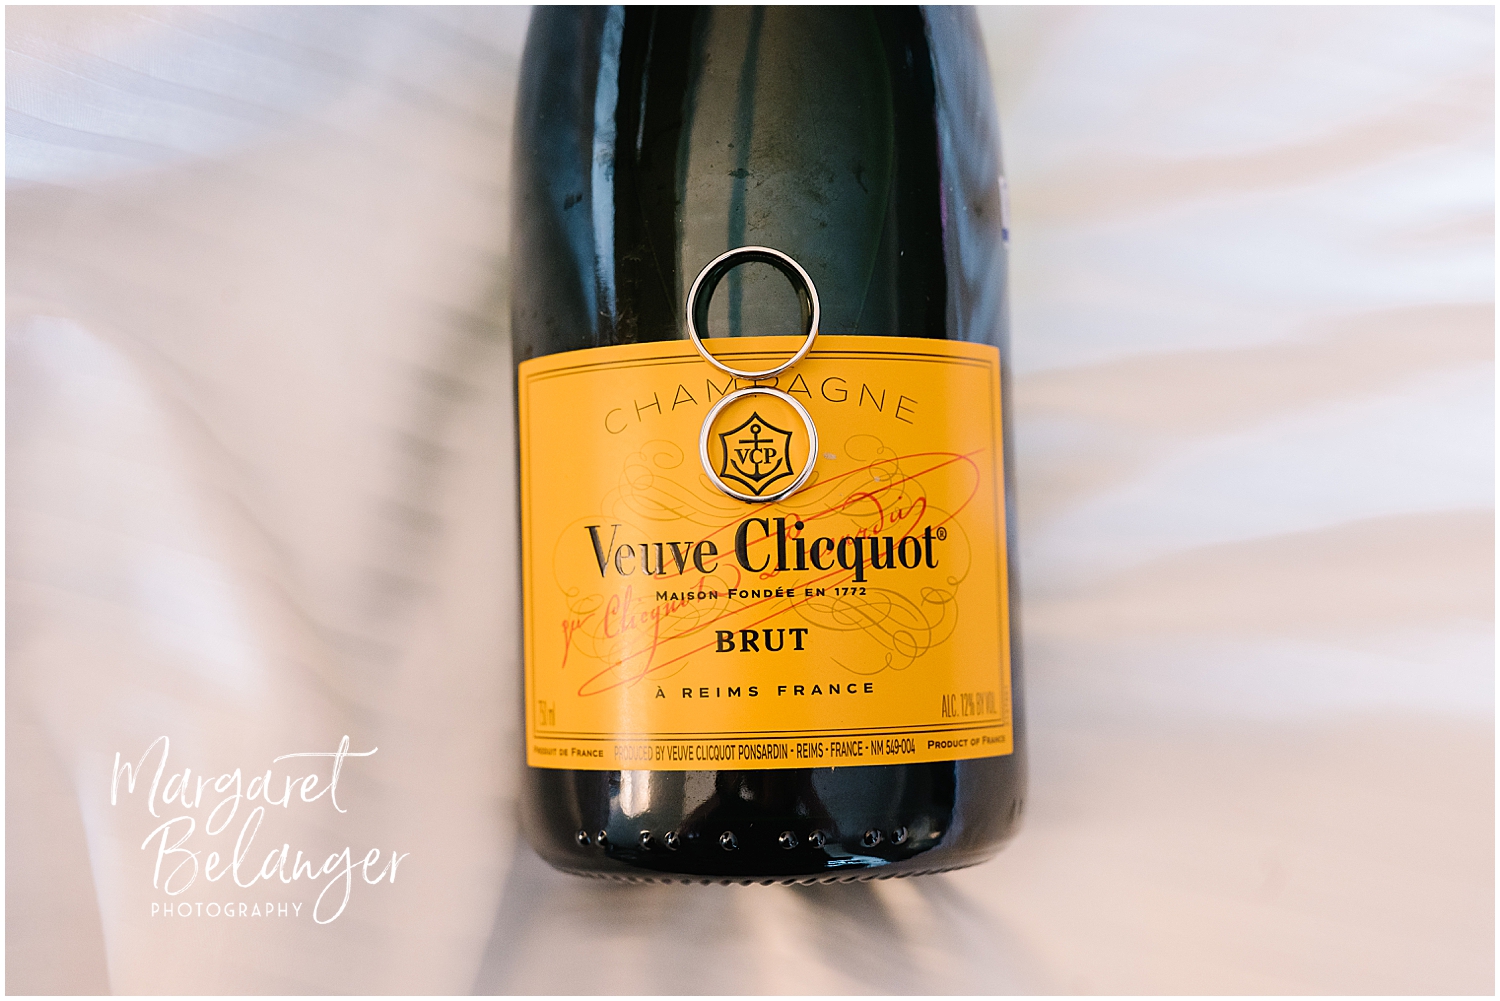 A bottle of veuve clicquot brut champagne with wedding rings placed on the label.